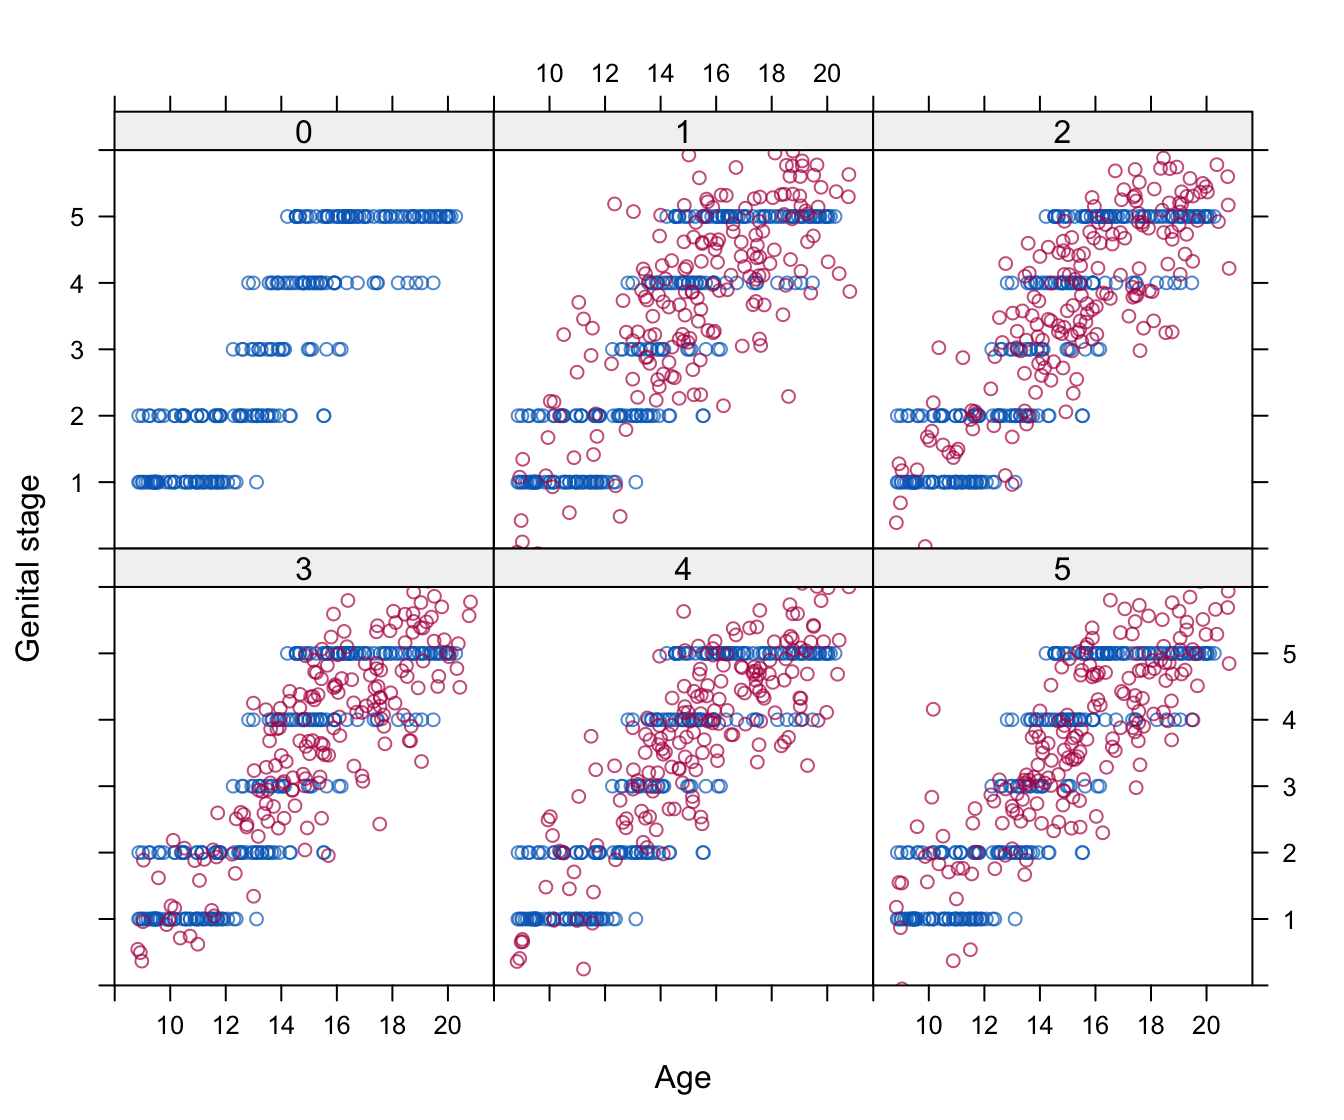 Joint modeling: Imputed data for genital development (Tanner stages G1–G5) under the multivariate normal model. The panels are labeled by the imputation numbers 0–5, where 0 is the observed data and 1–5 are five multiply imputed datasets.